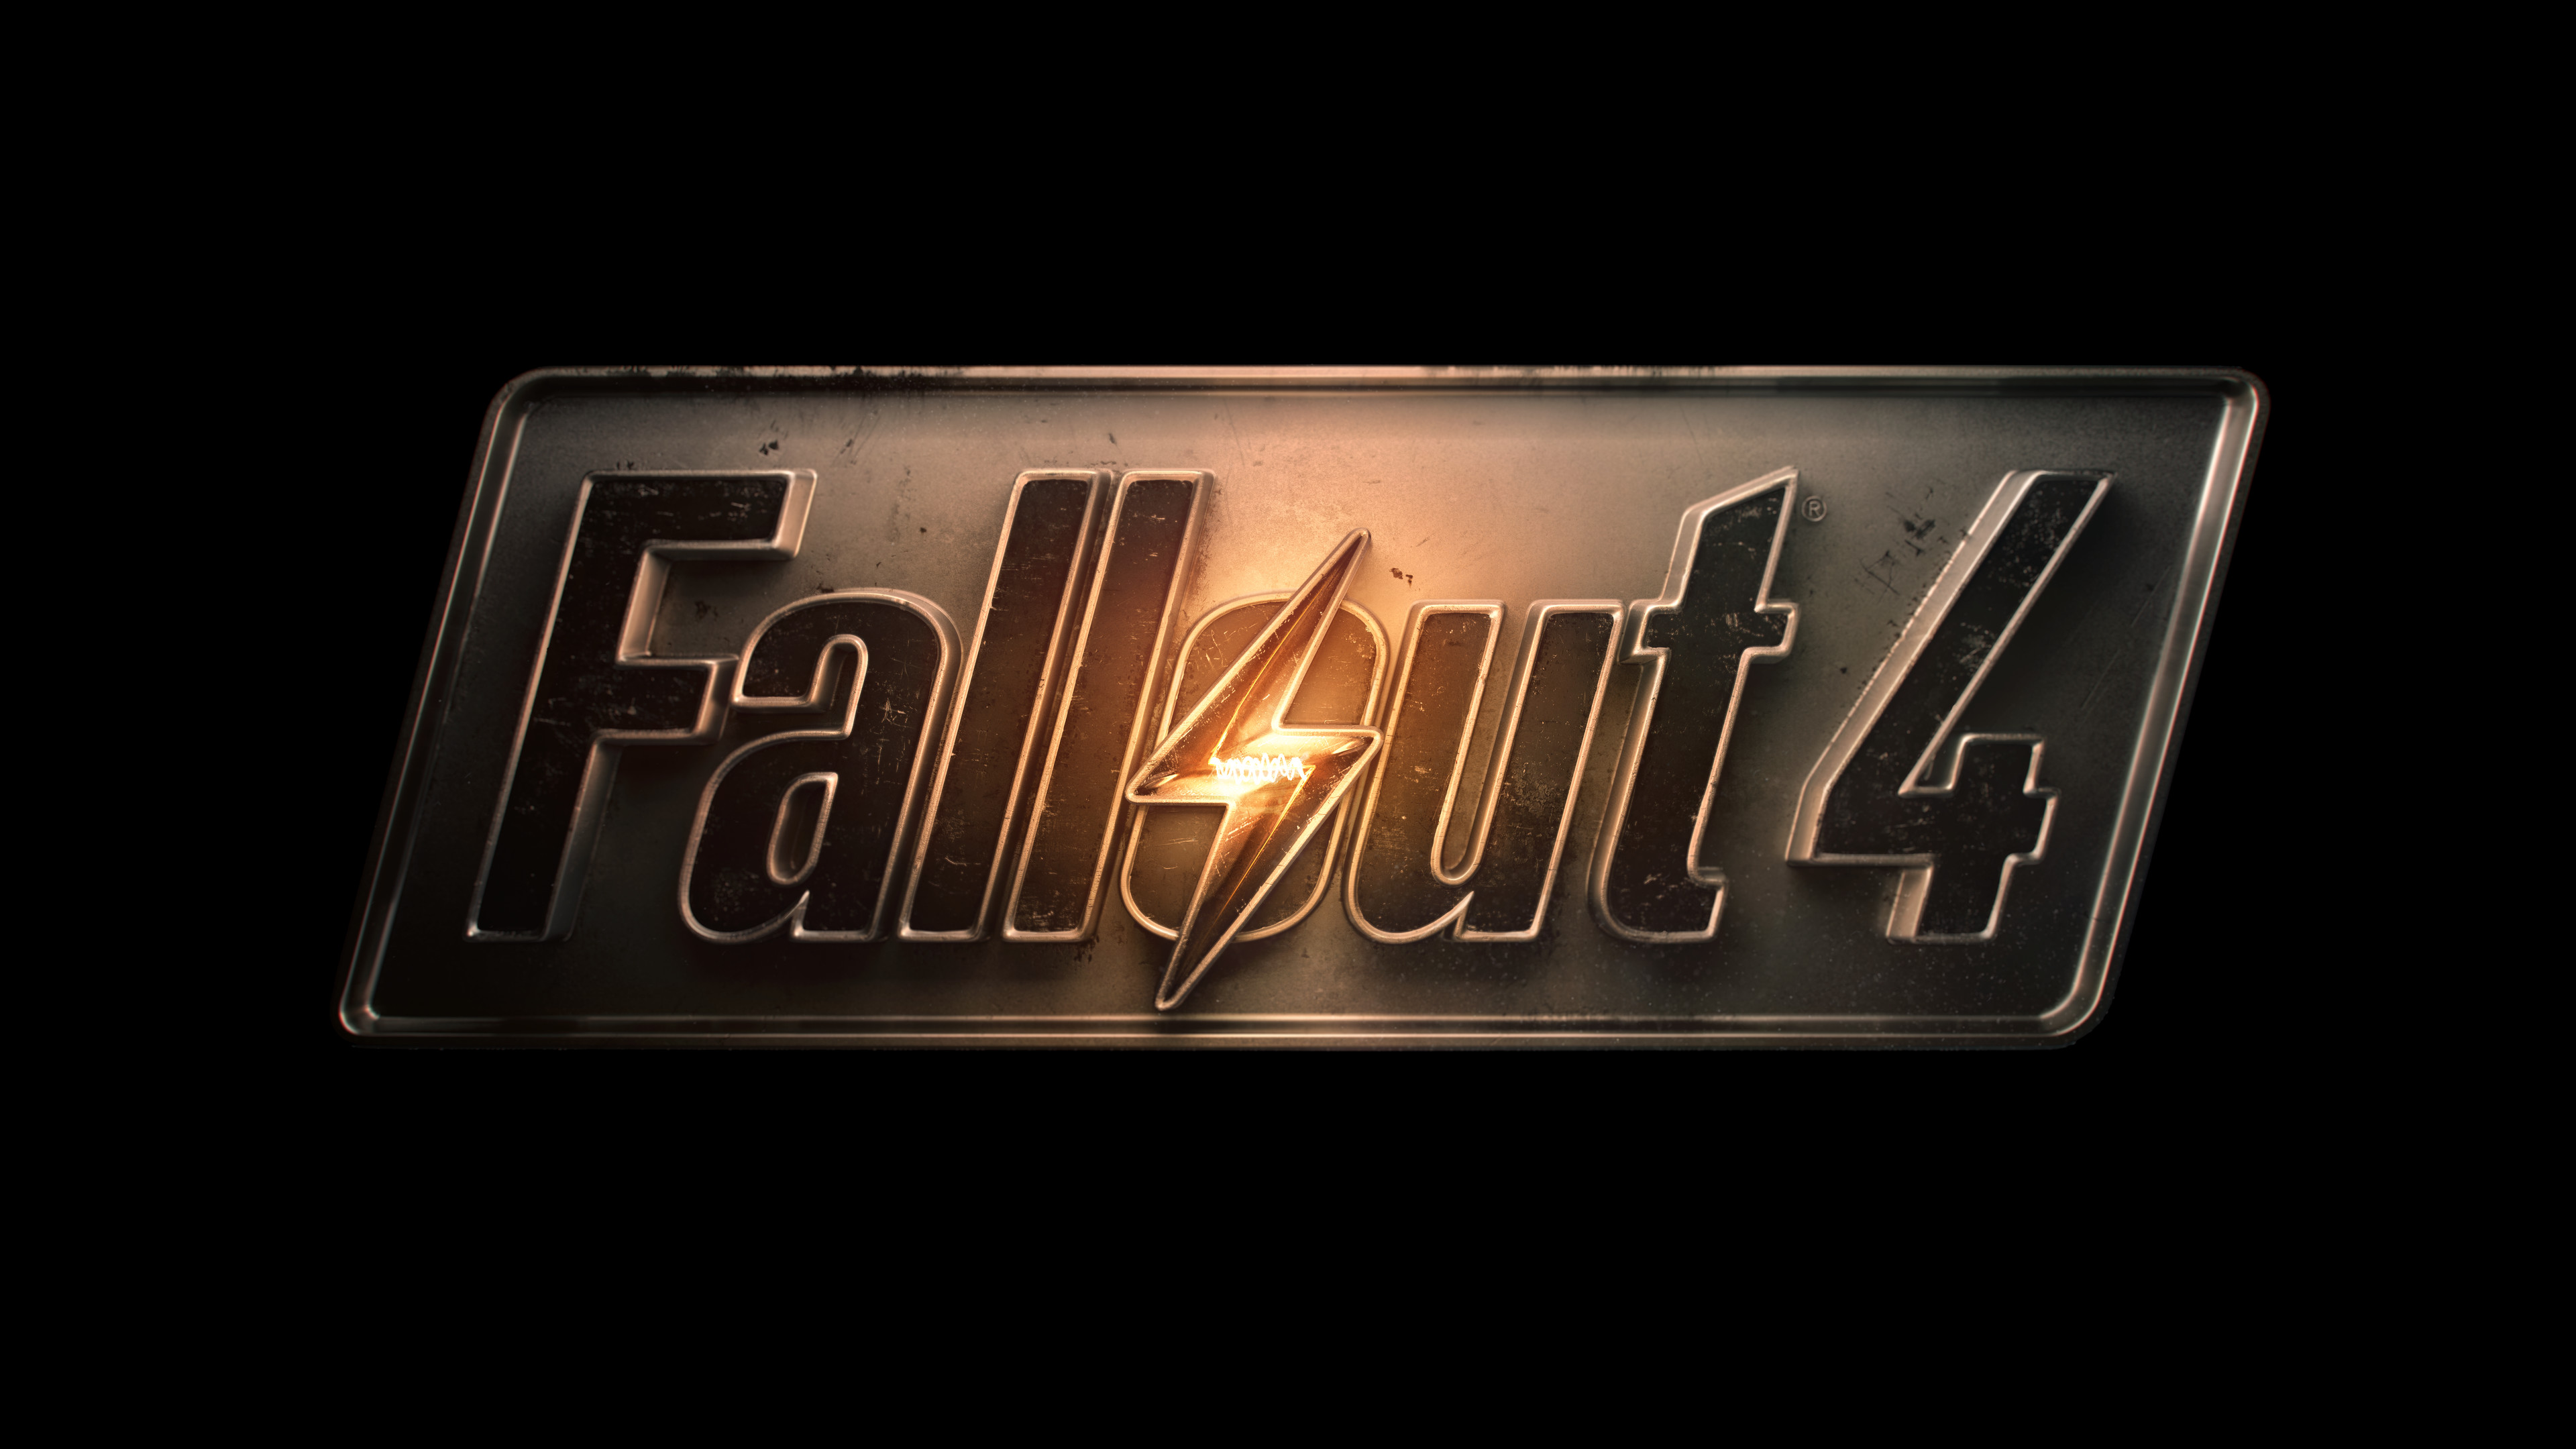 3840x2160 Fallout 4 Wallpapers in Best  Resolutions | Kara Millet NMgnCP.com